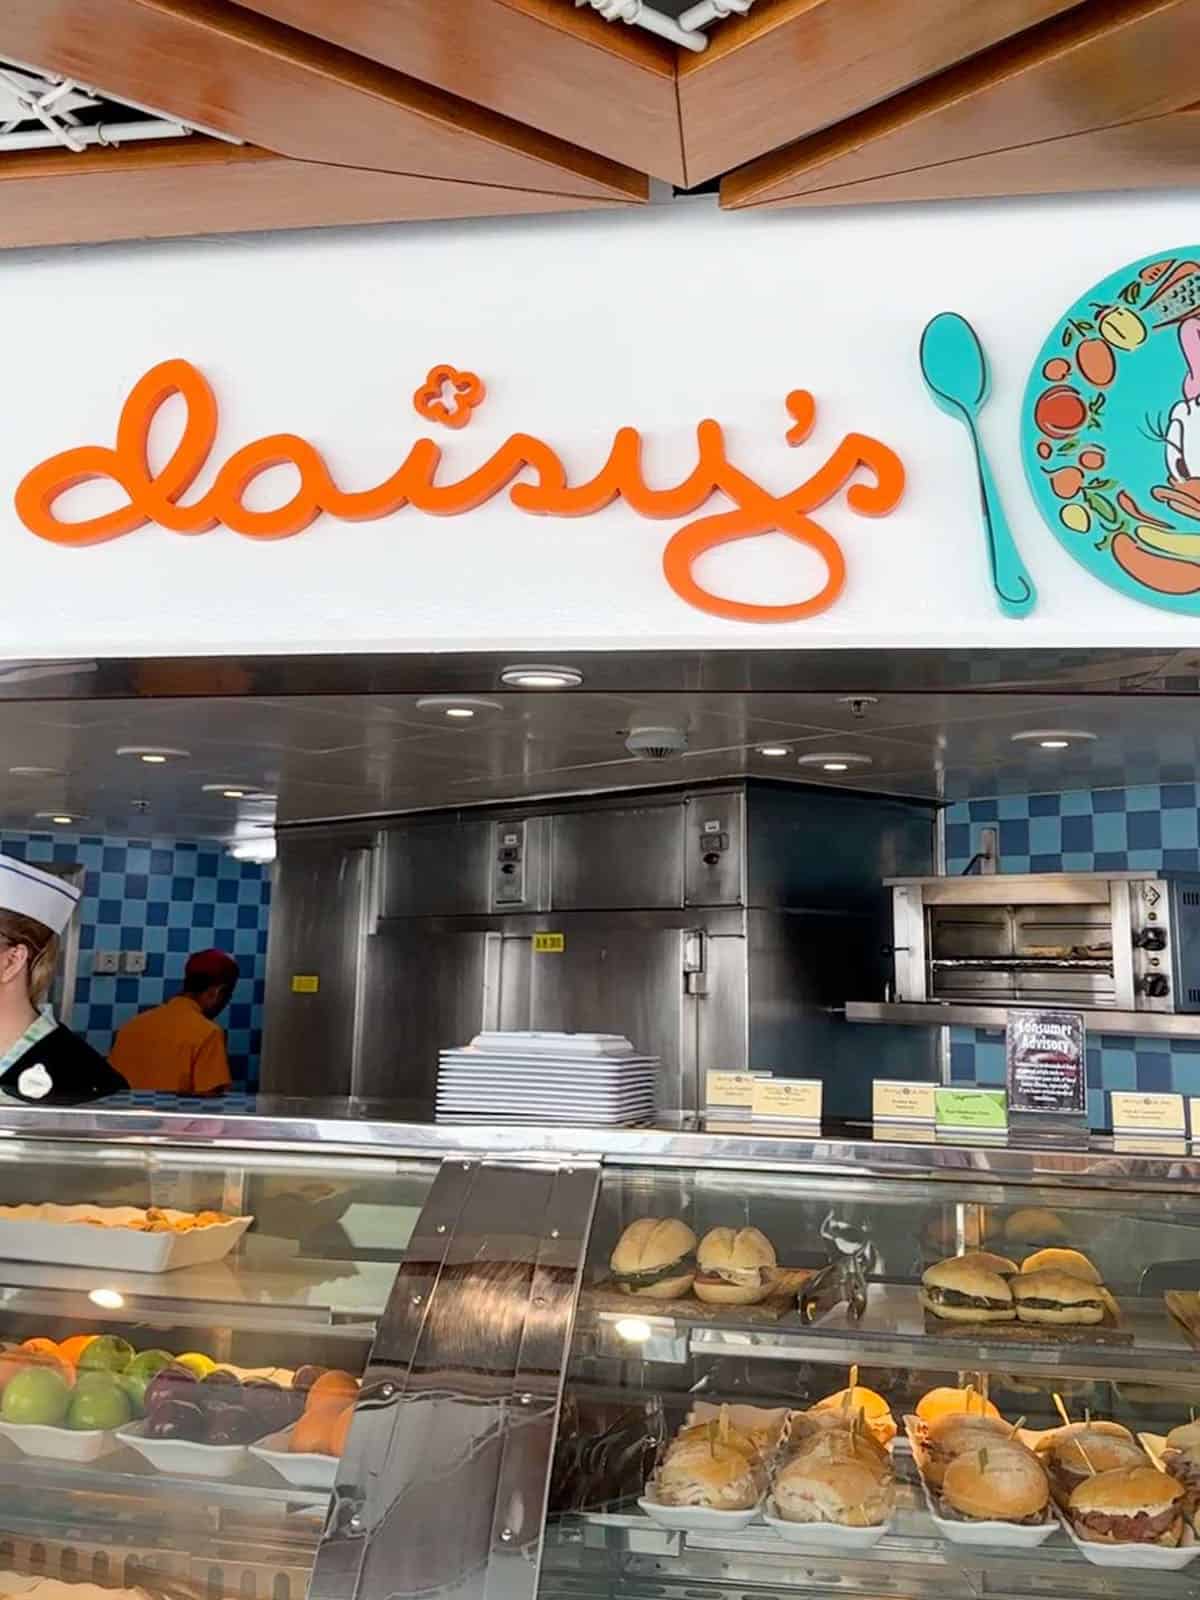 A white sign with orange writing saying Daisy over a sandwich counter service cafe.